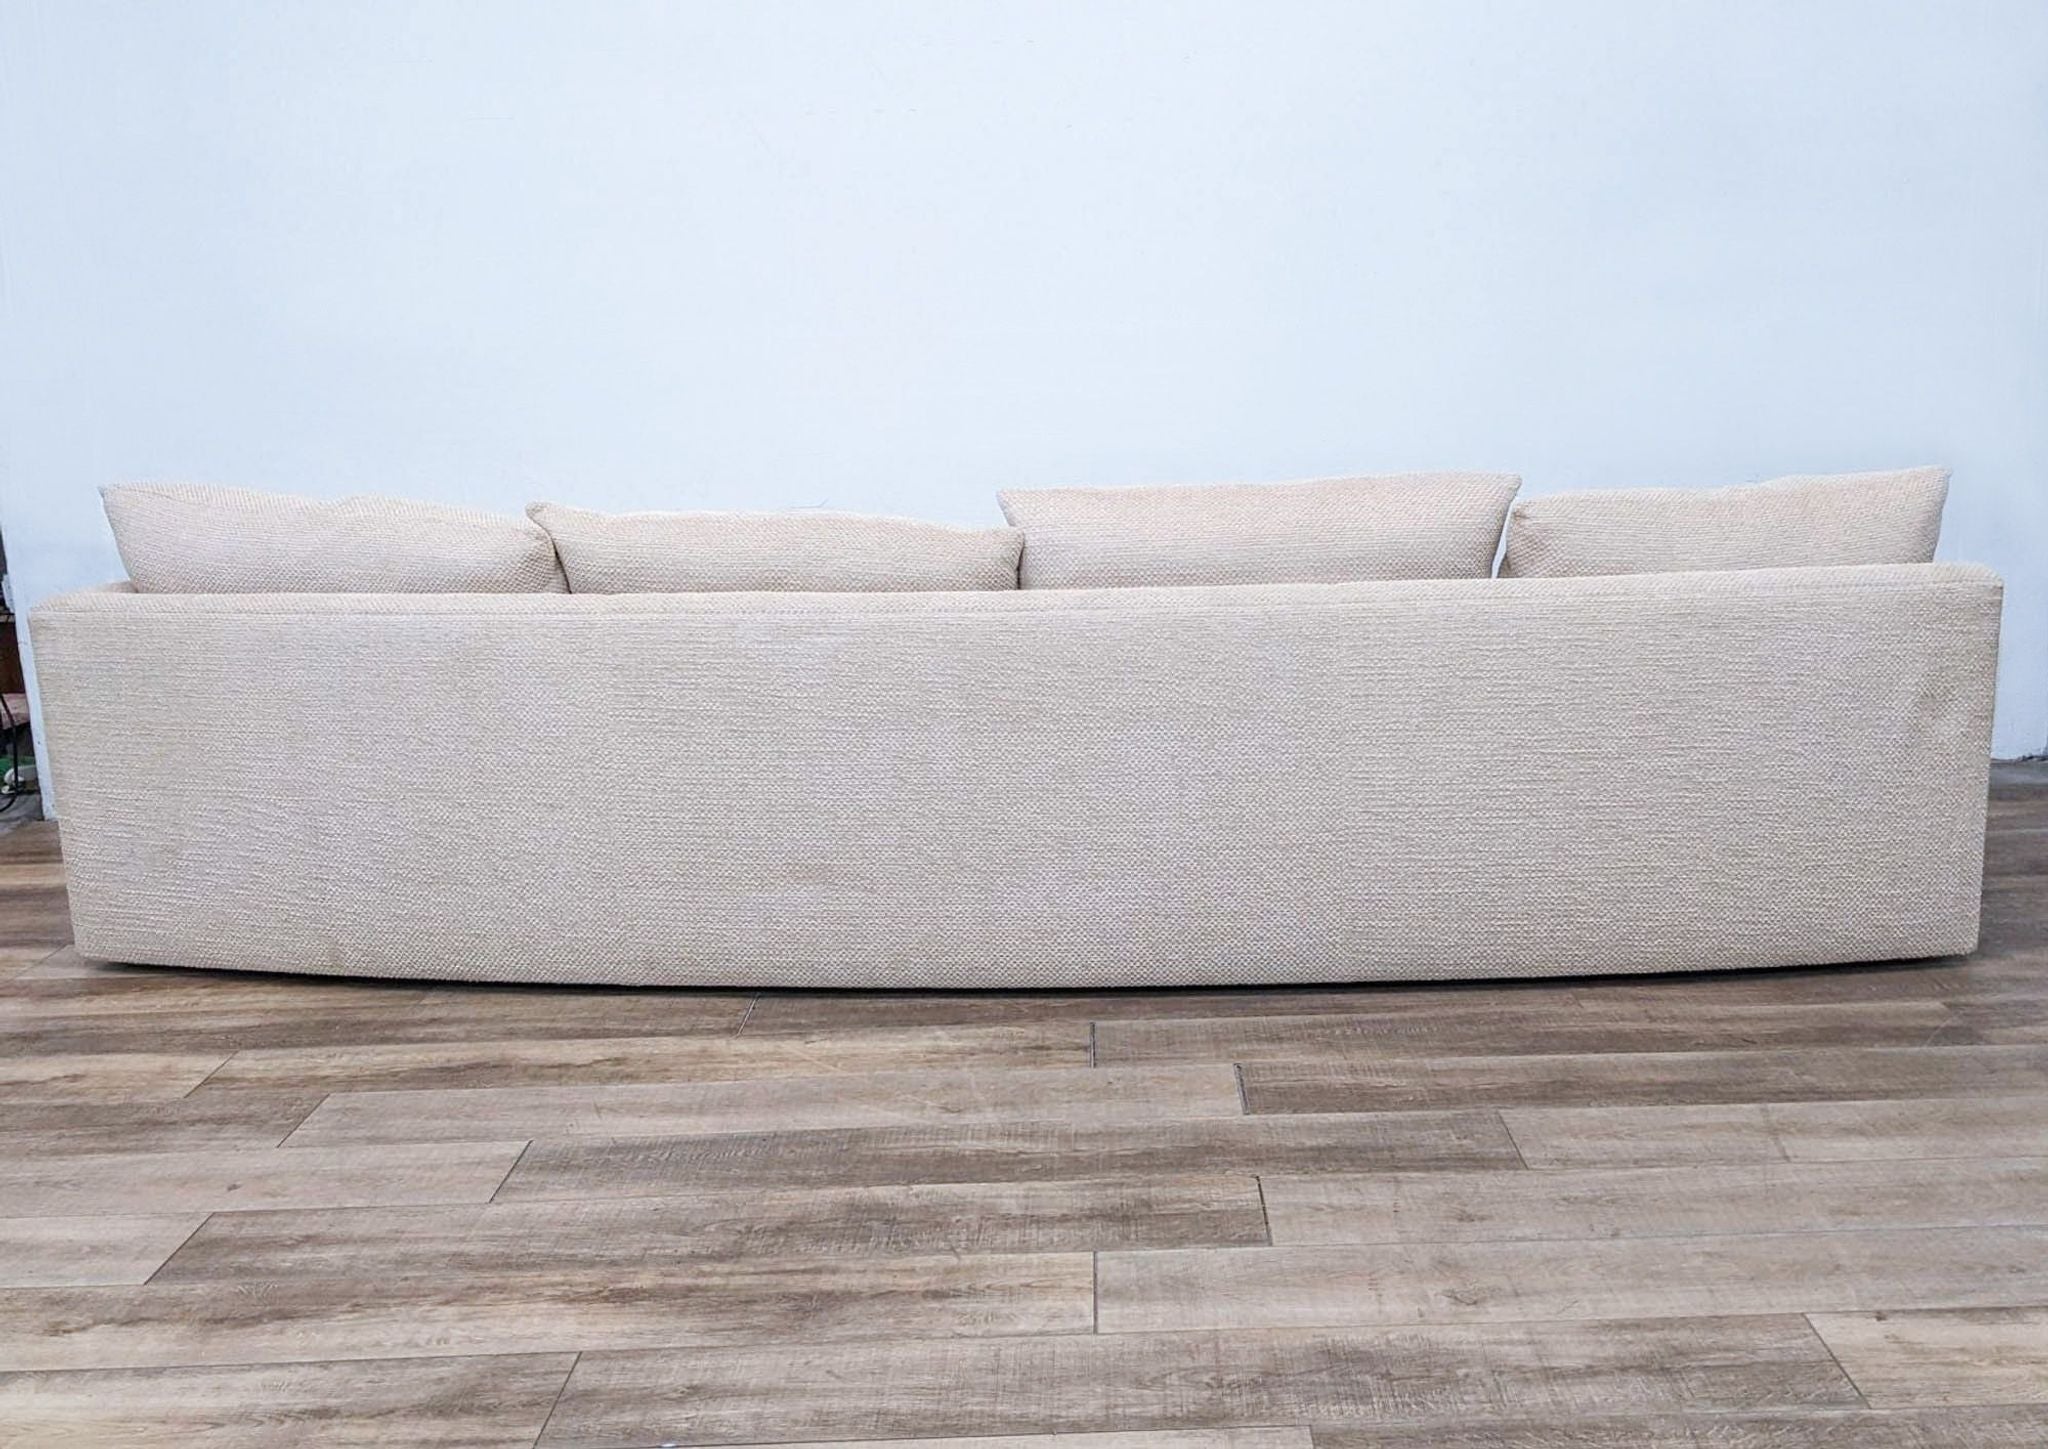 Reperch one-piece curved sectional sofa with one armrest and several cushions, against a plain wall on wooden flooring.